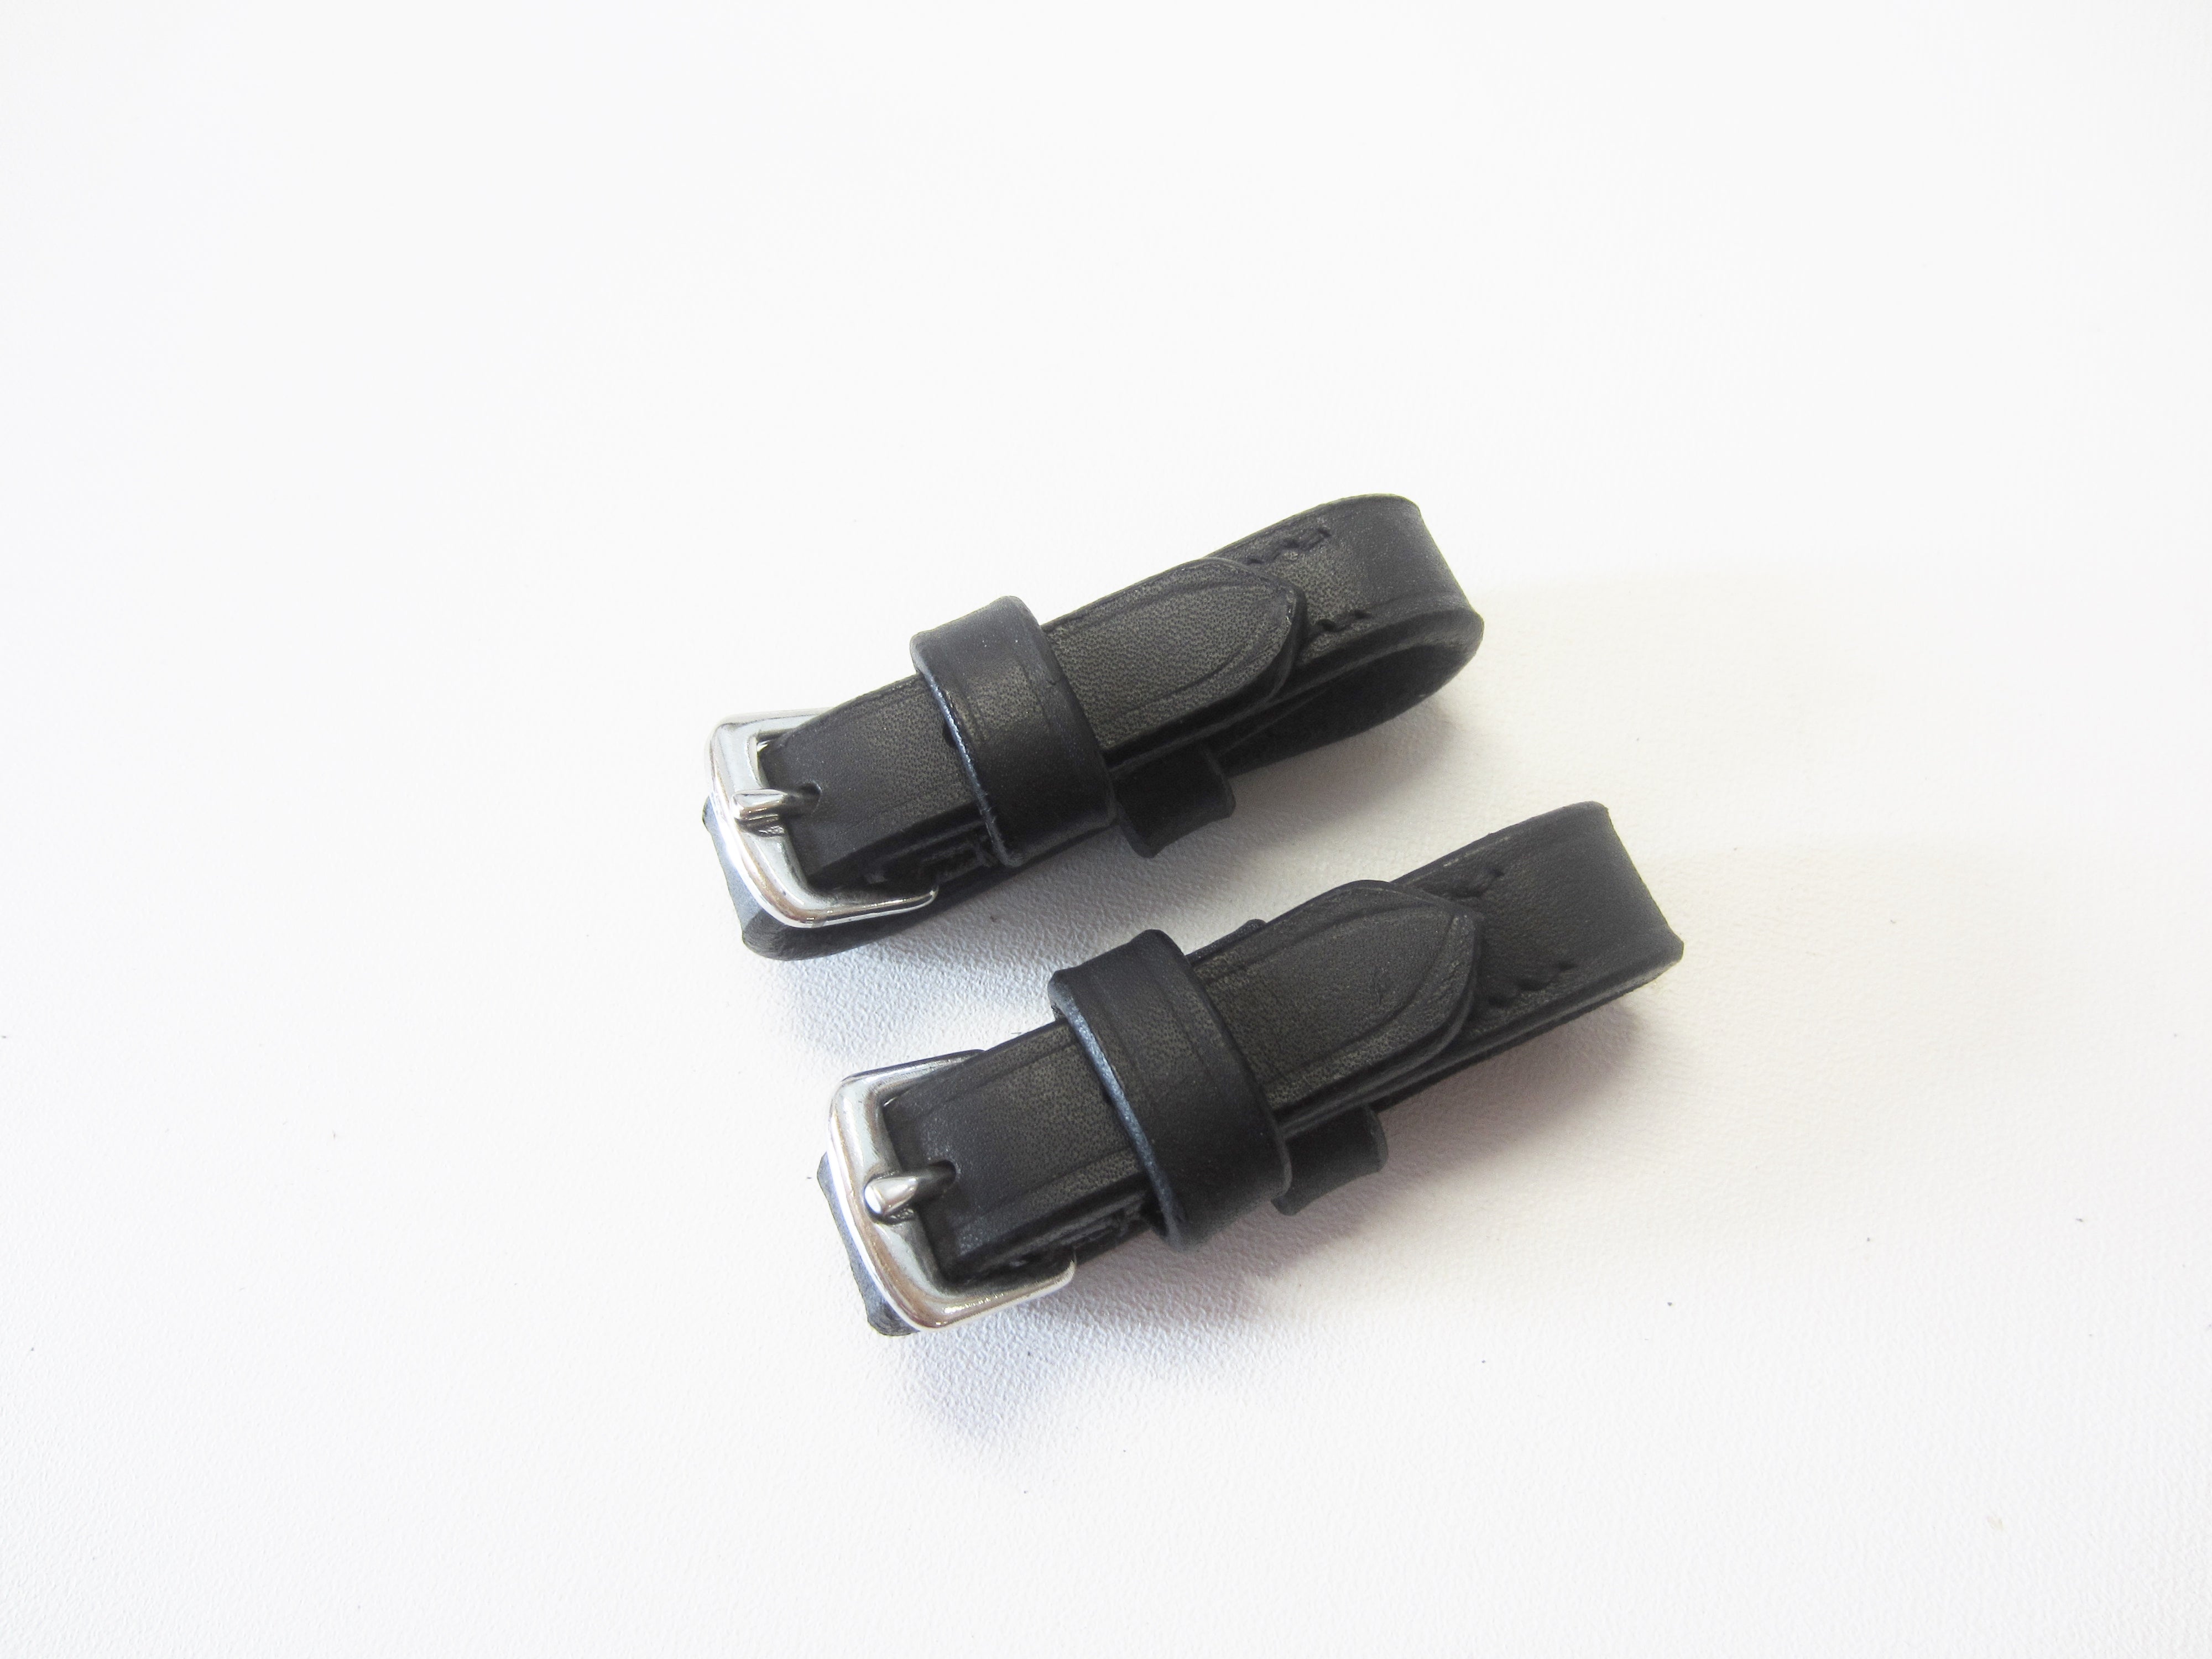 1 pair of classic bit straps for buckling onto a Cavecon or cavesson 